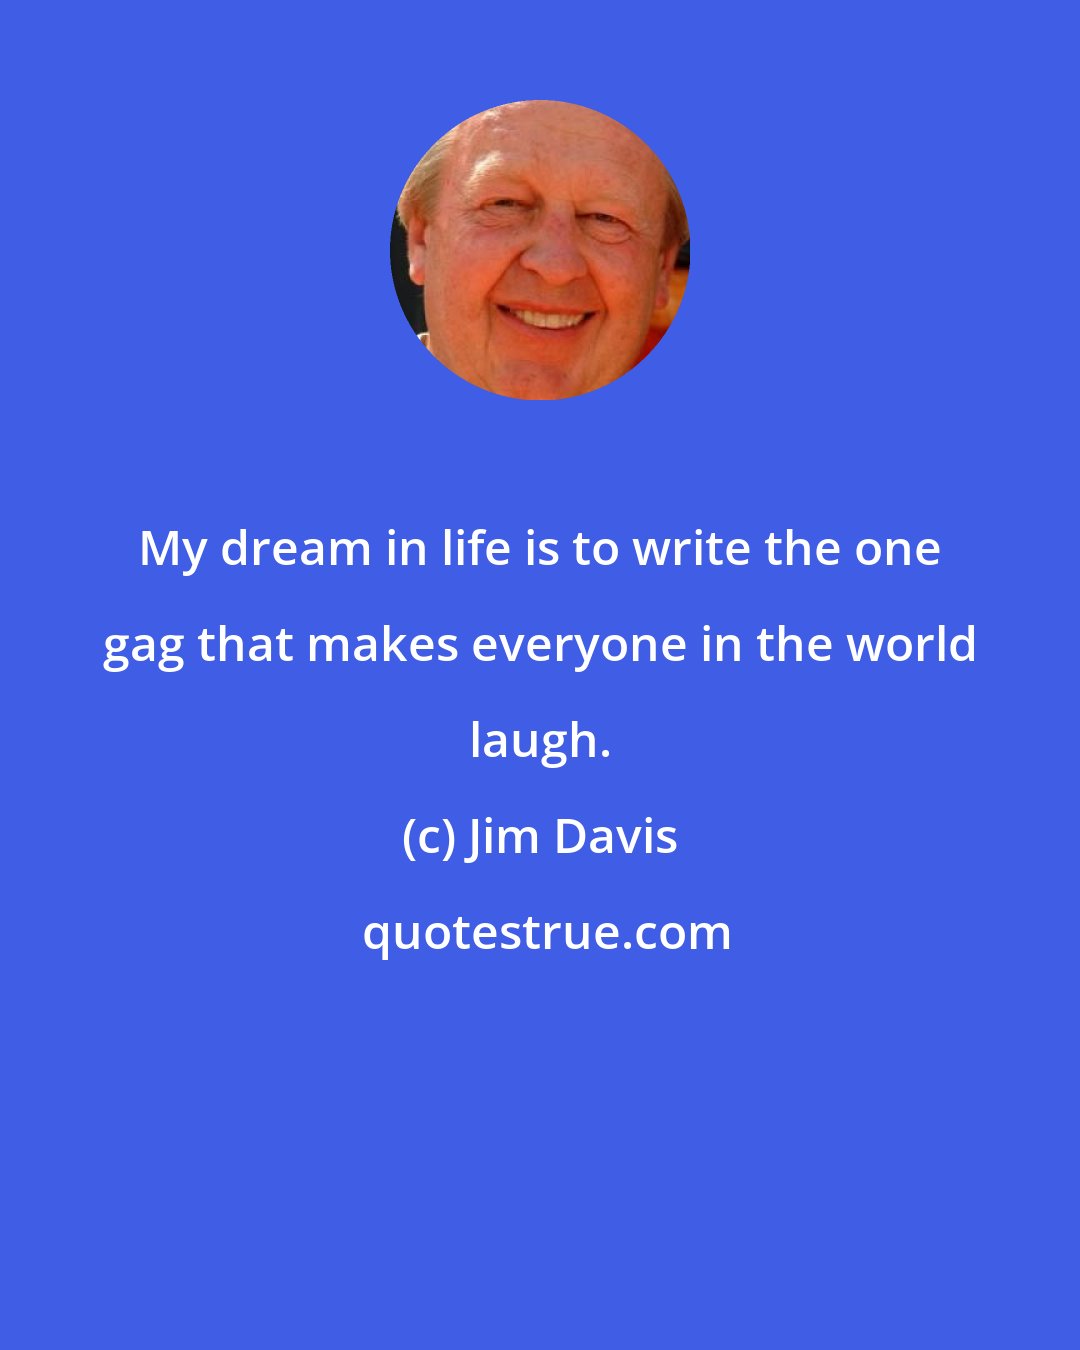 Jim Davis: My dream in life is to write the one gag that makes everyone in the world laugh.